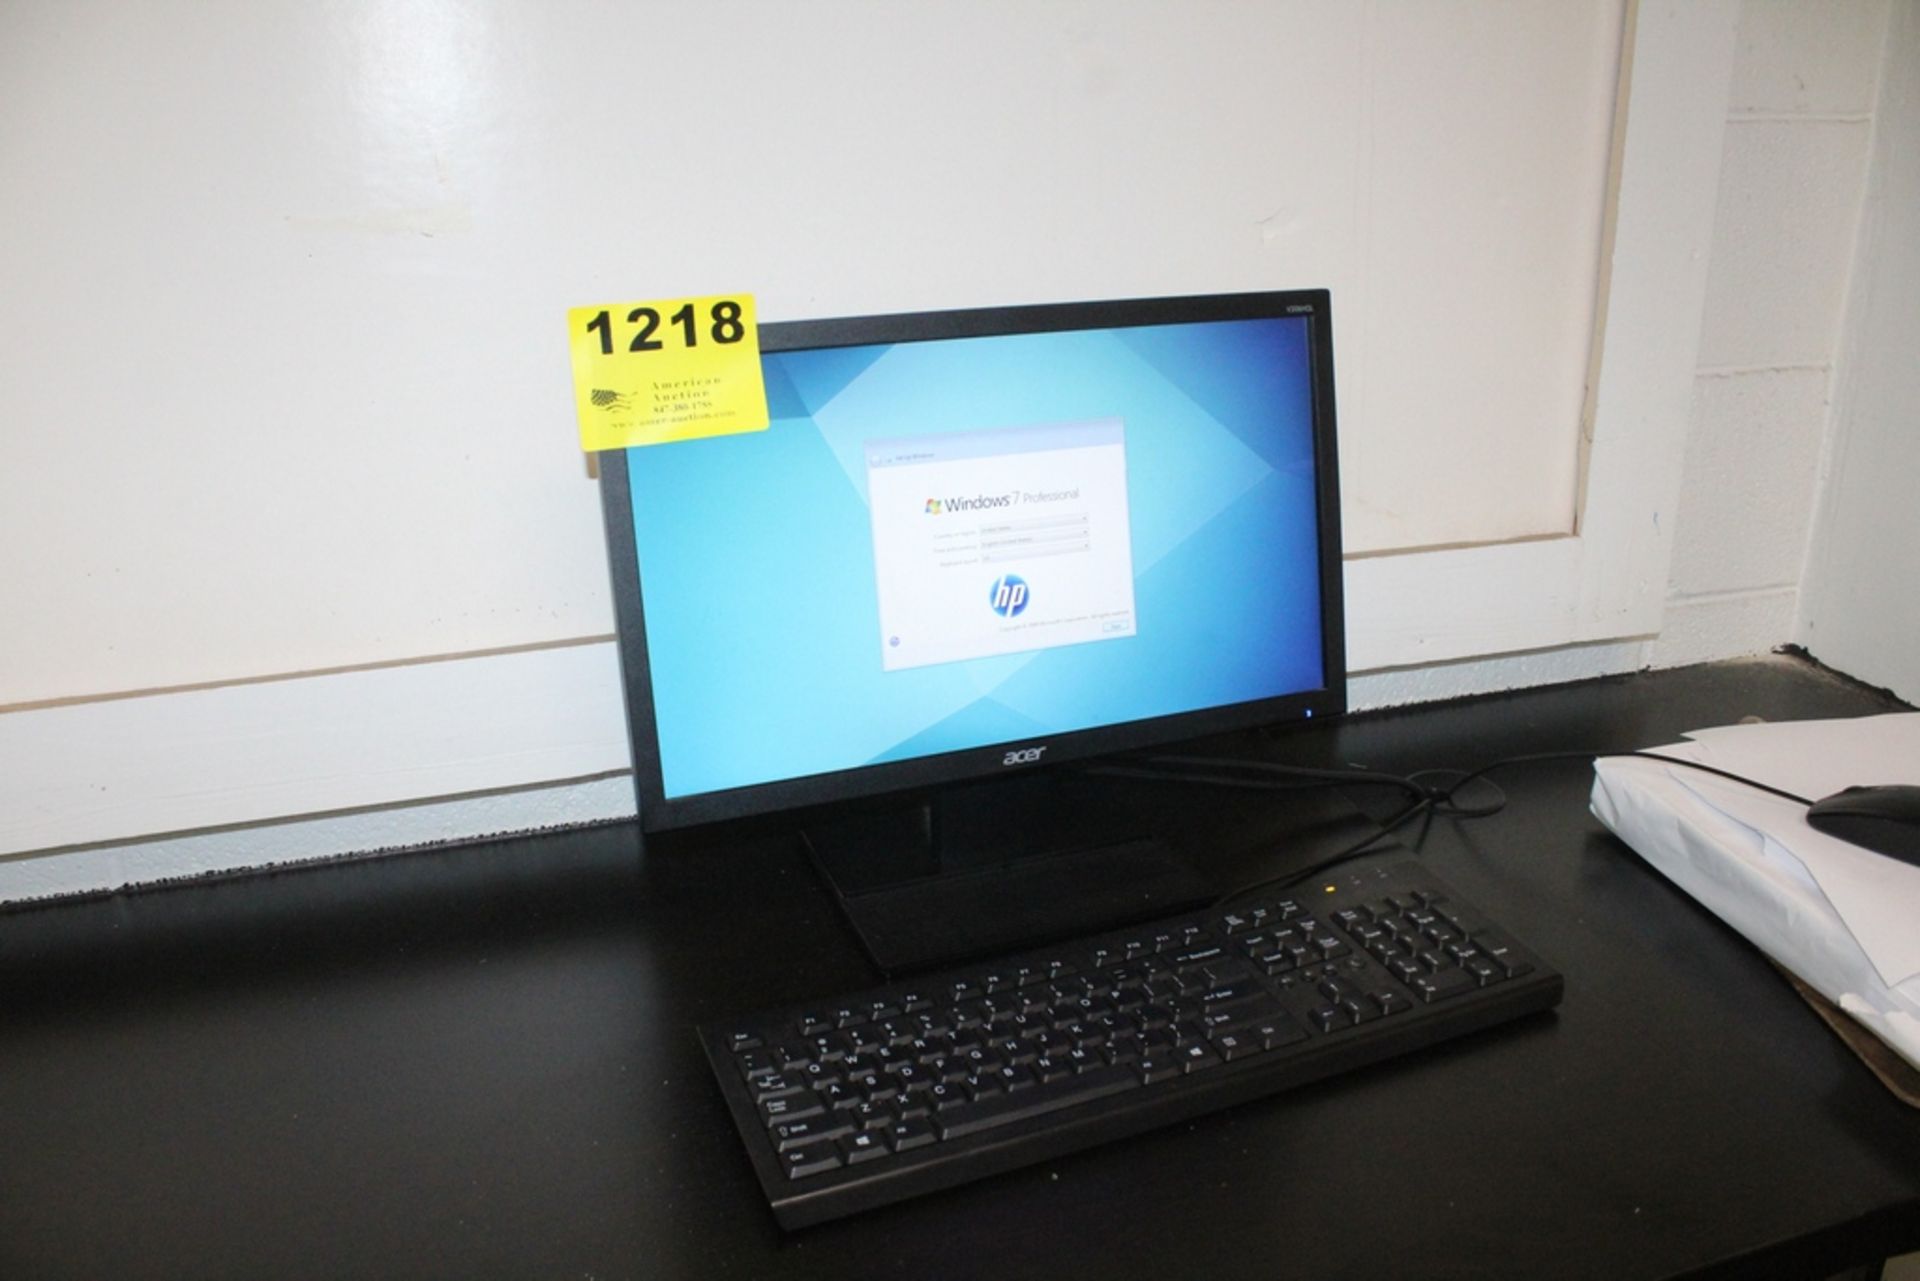 HP 3500 DESKTOP COMPUTER WITH ACER FLATSCREEN MONITOR, KEYBOARD AND MOUSE